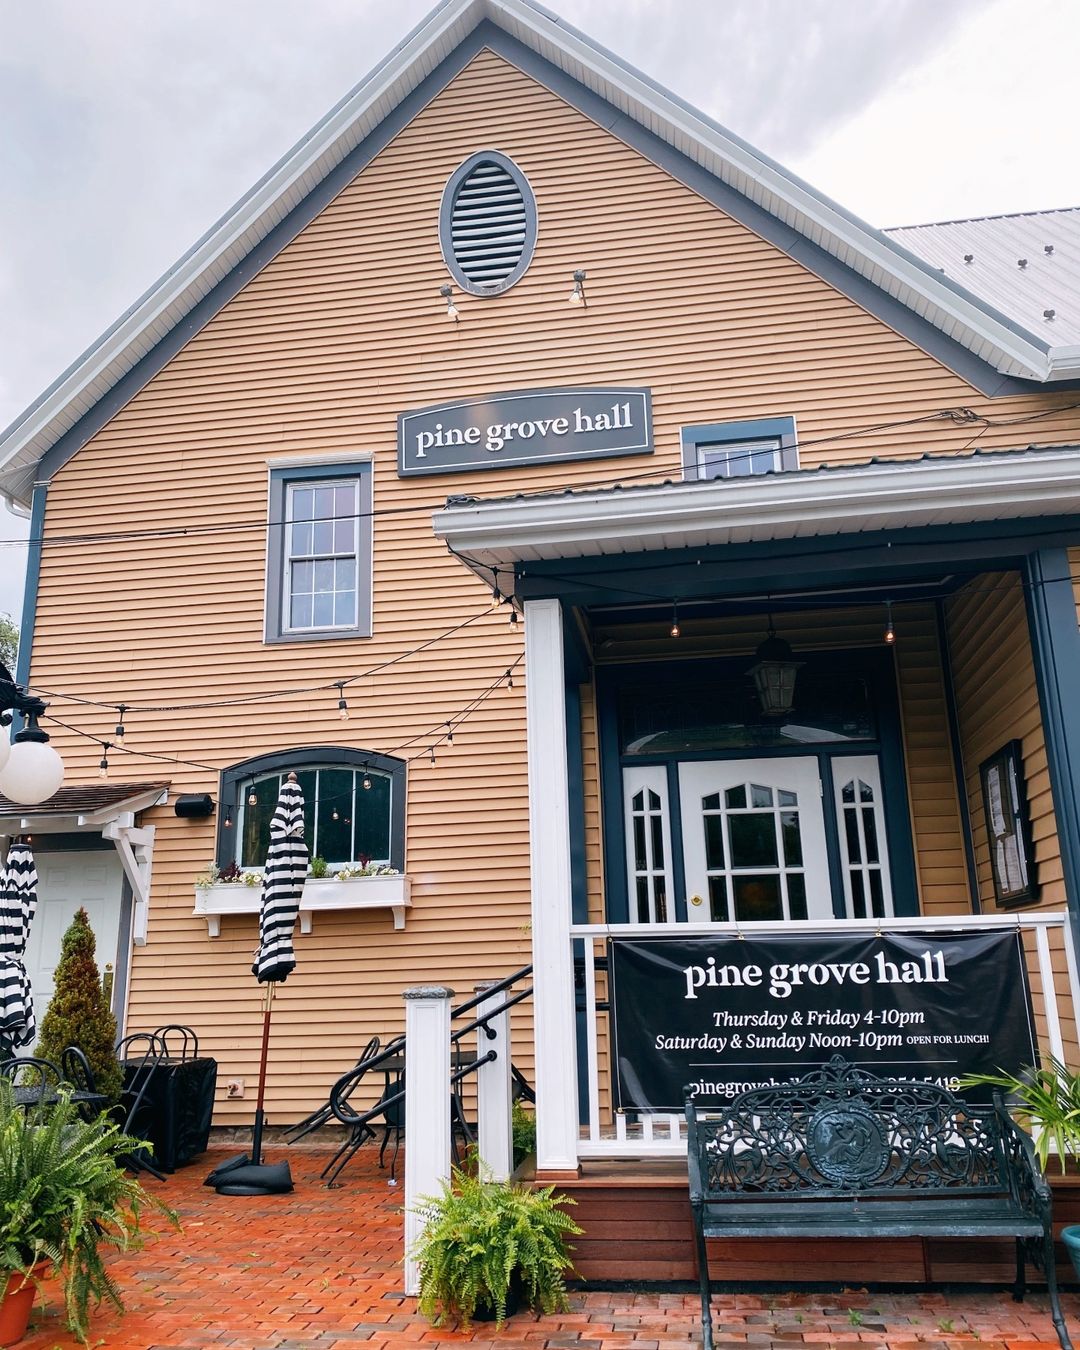 #HVAgventures destination @pinegrovehall works closely with over 25 local farmers and purveyors so that each dish pays homage to the beauty and bounty of central Pennsylvania soil.
Pine Grove Hall's mission is to nurture body, mind and spirit through me